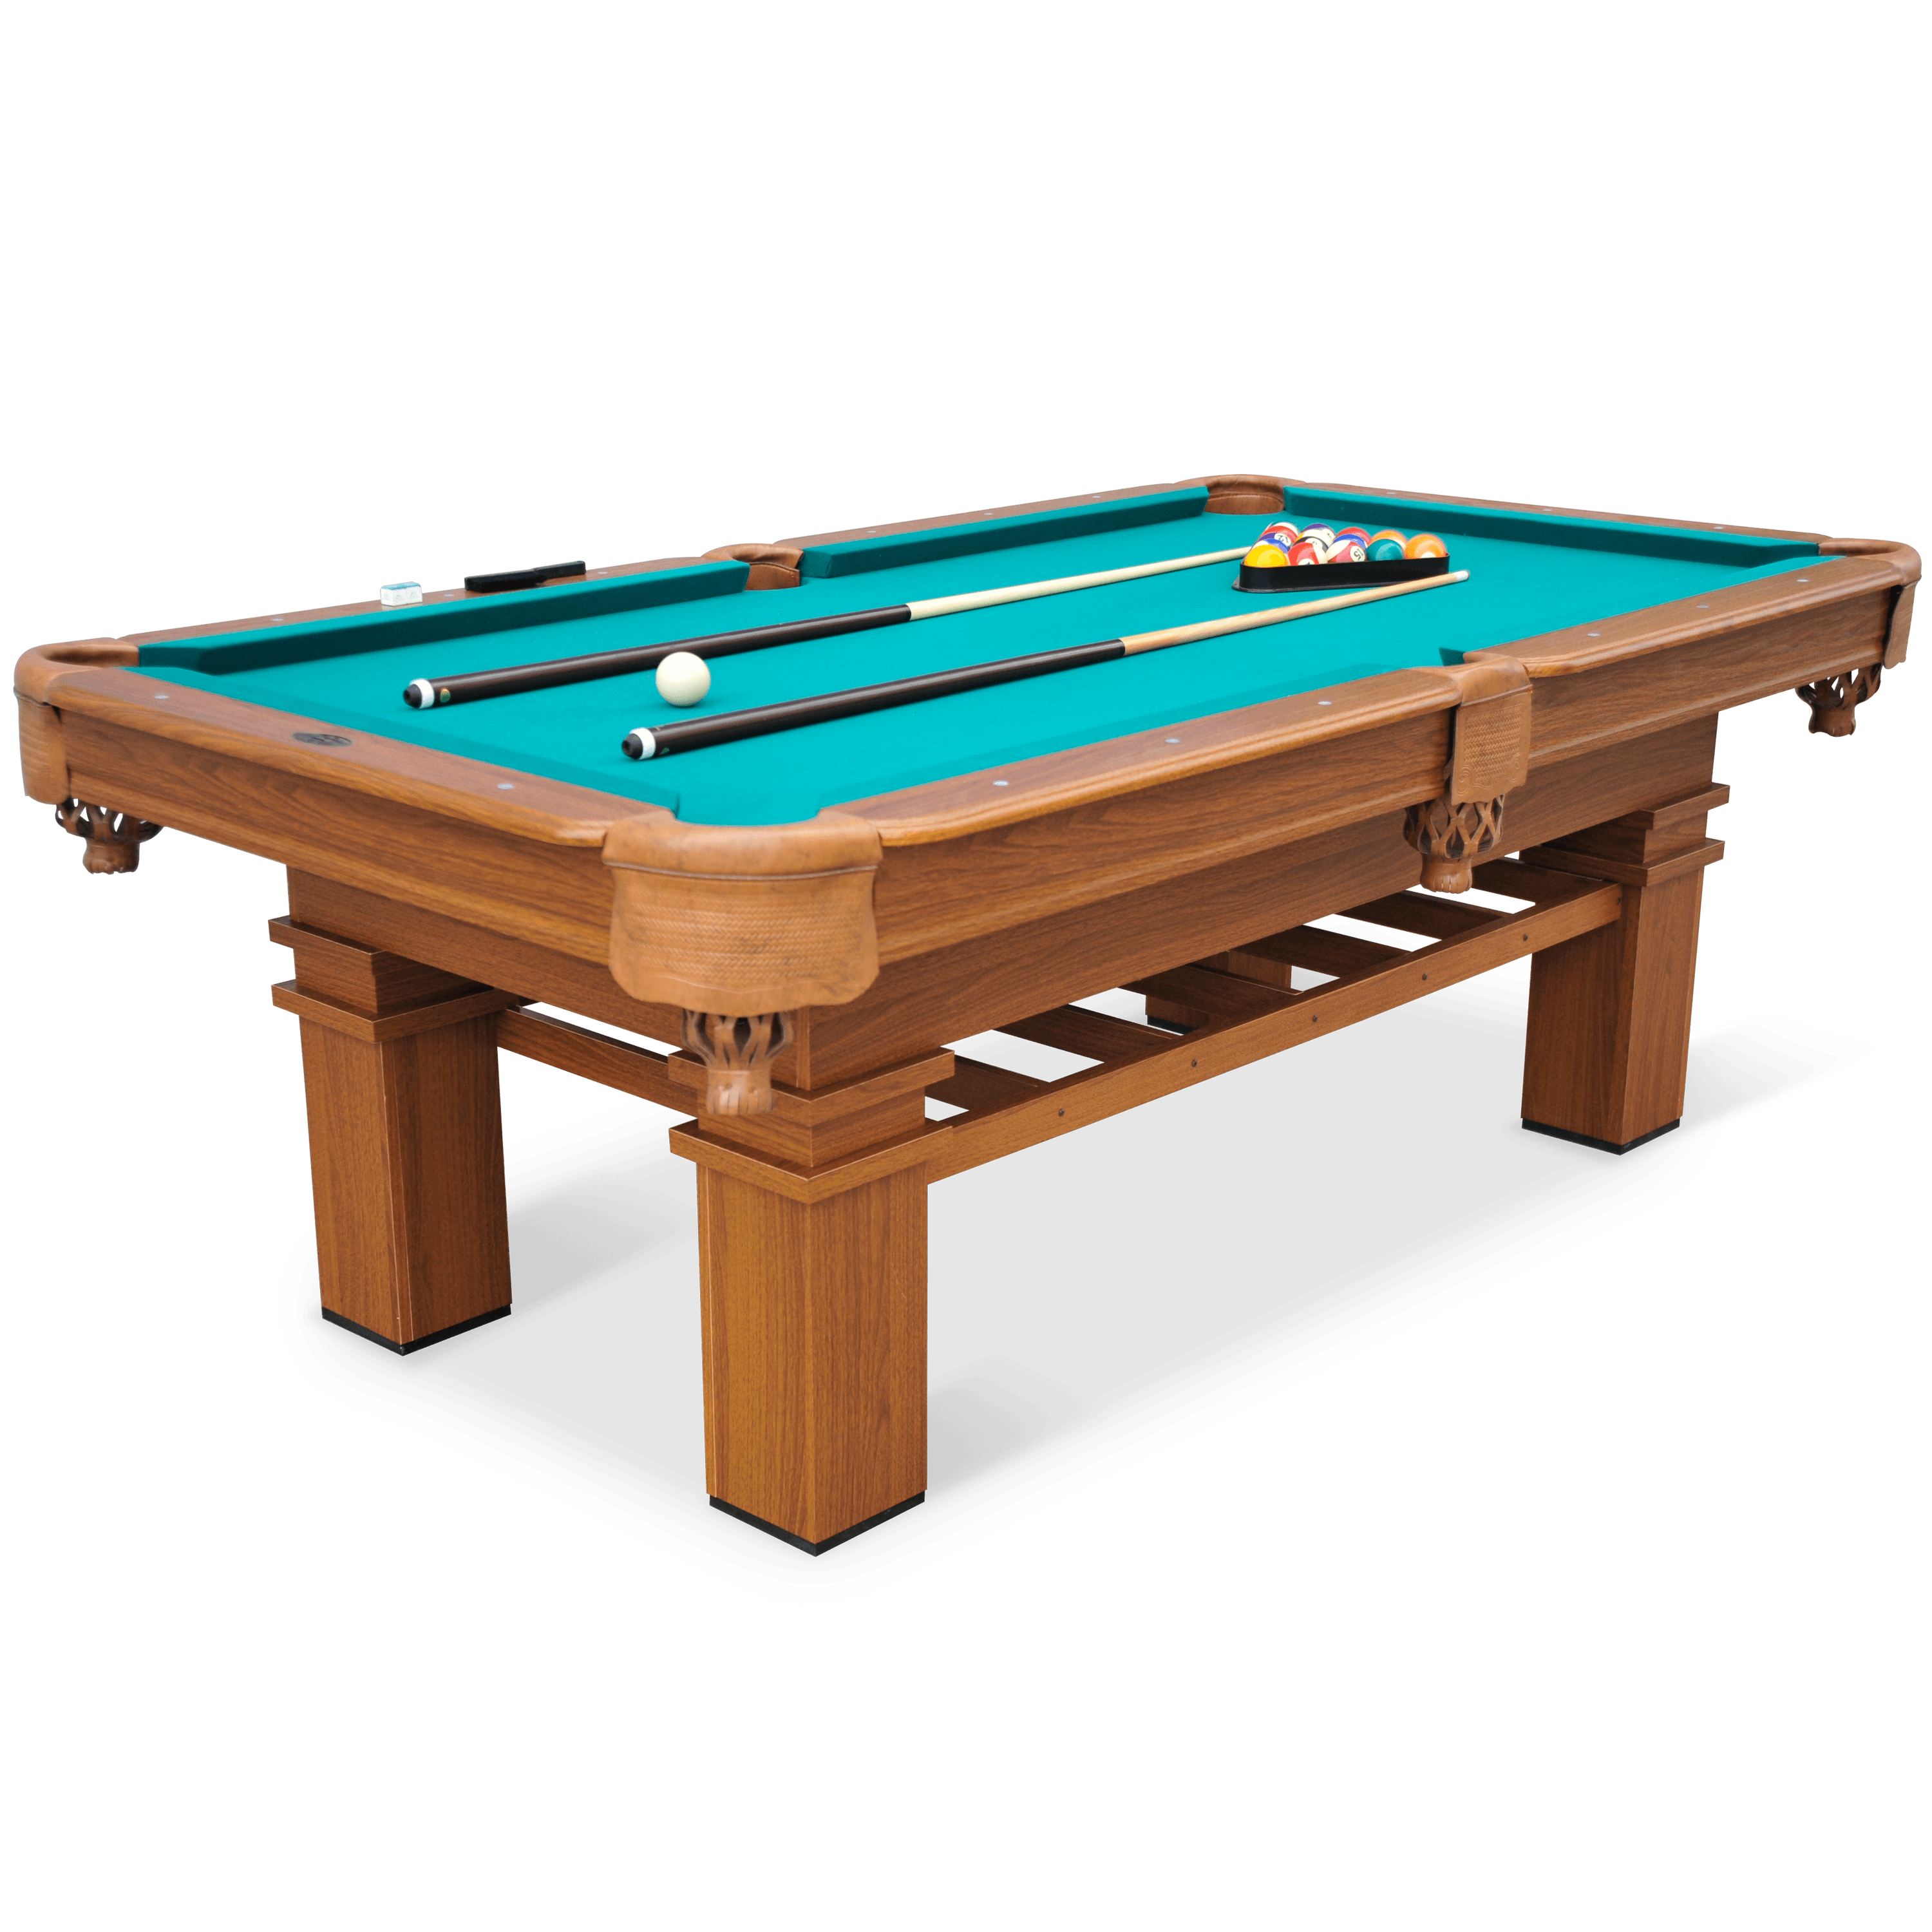 EastPoint Sports 87" Sinclair Billiard Table with 4-Piece Table Tennis Top - image 2 of 10